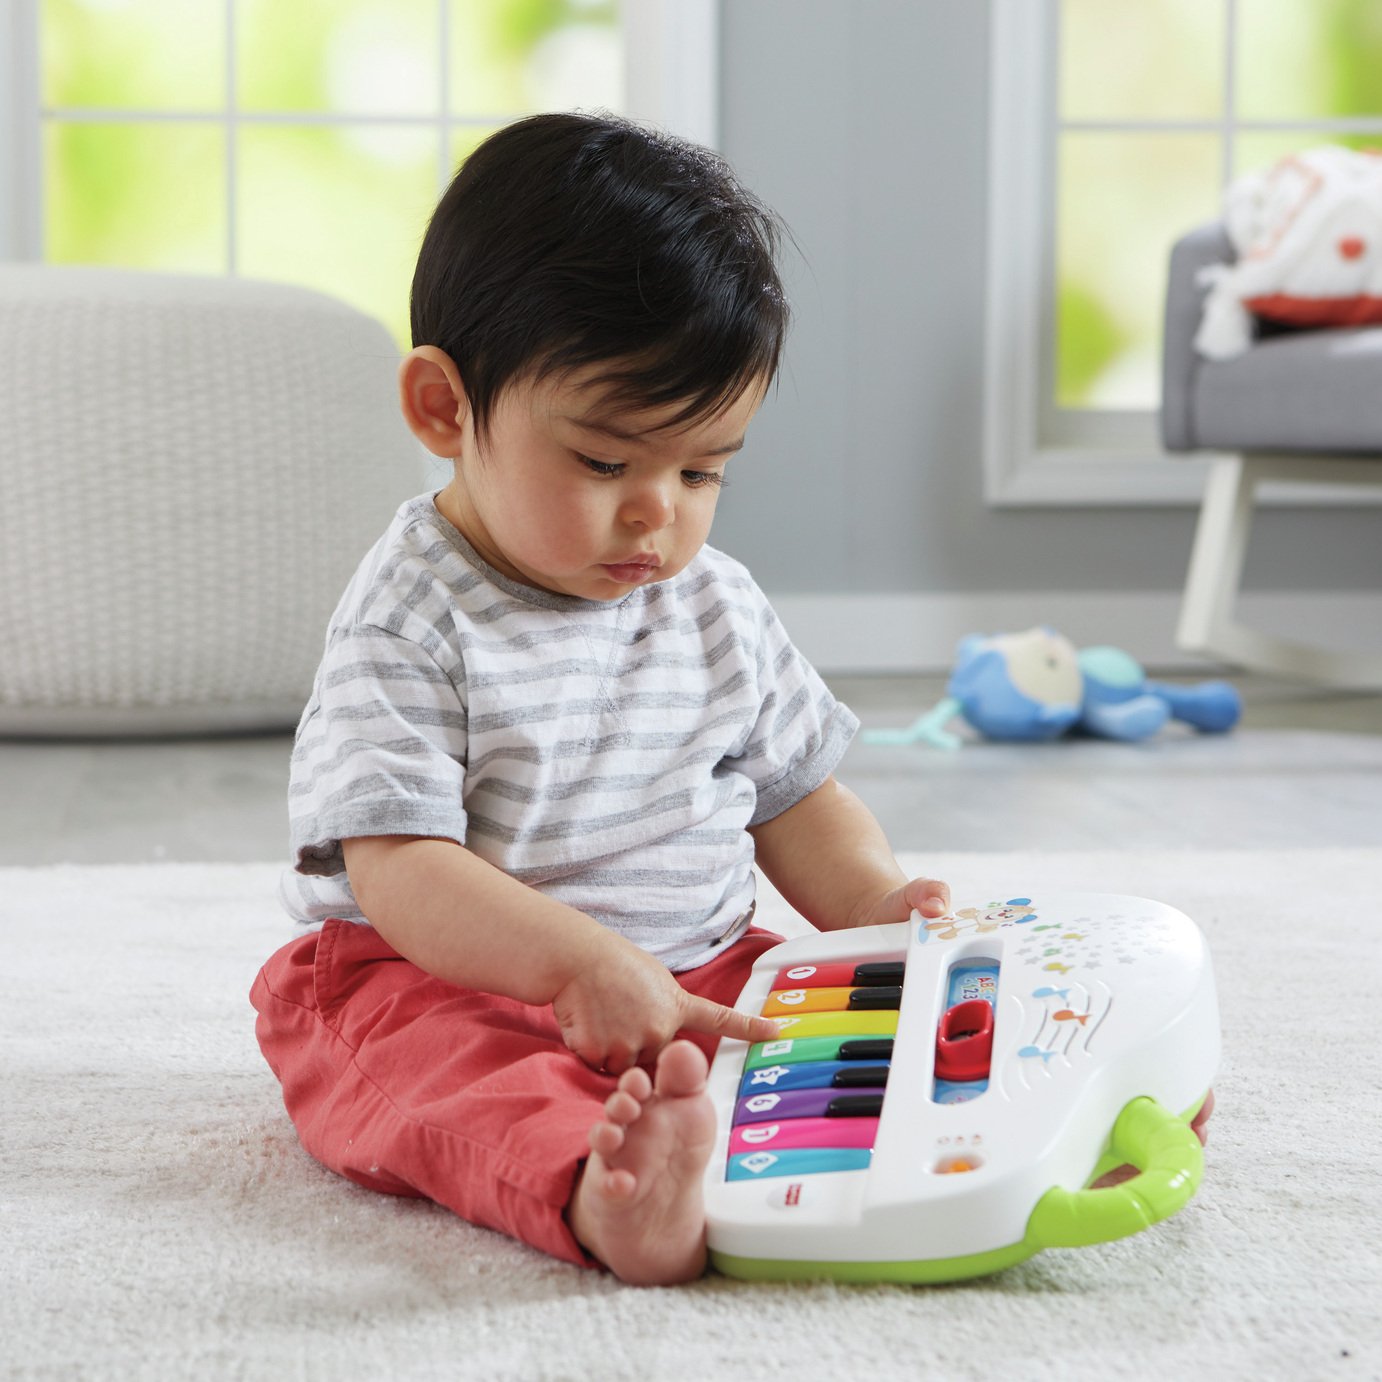 Fisher-Price Laugh & Learn Silly Sounds Light-Up Piano Toy Review